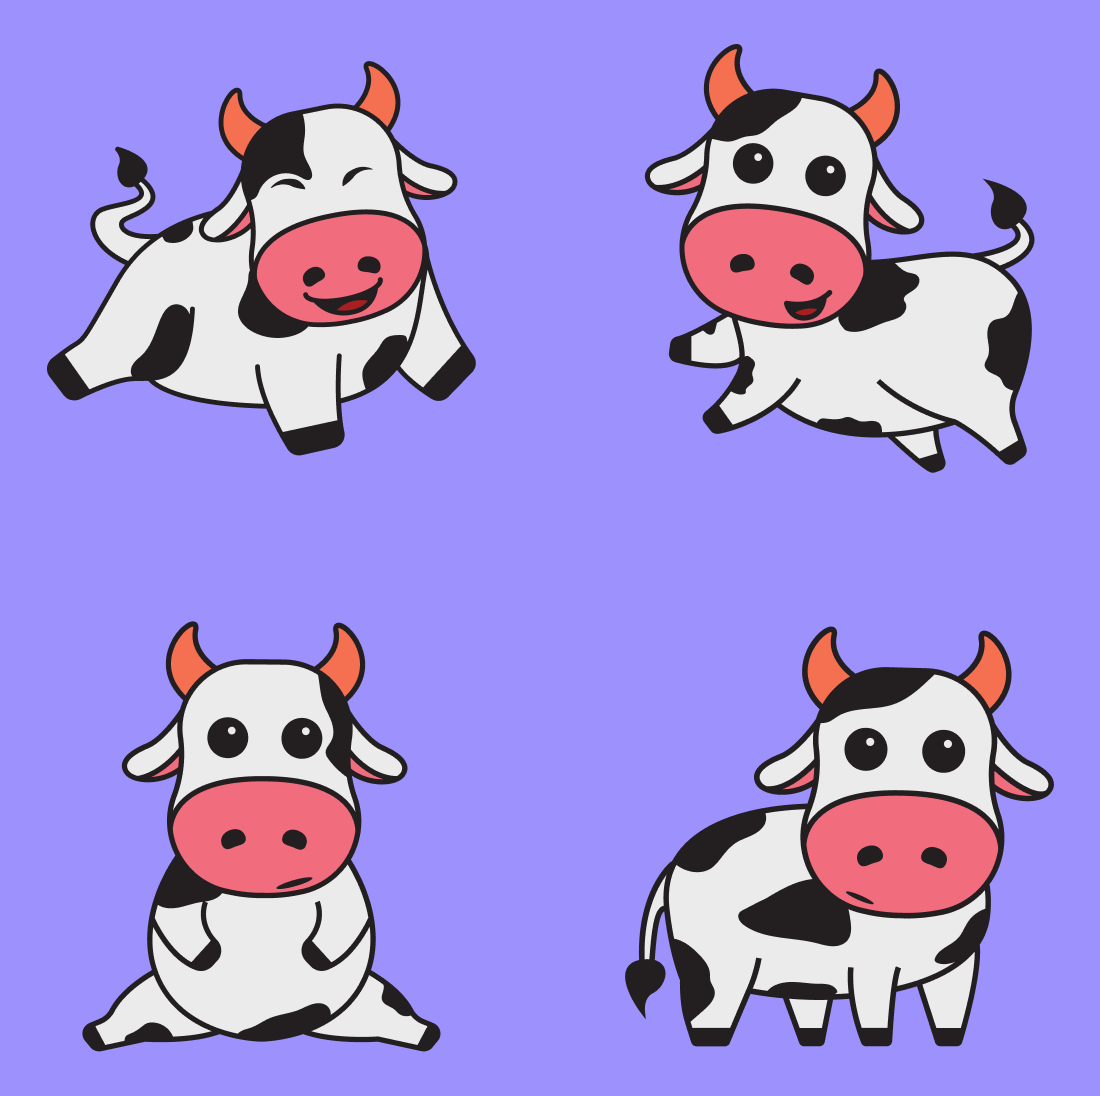 Image of happy cartoon cows on a blue background.